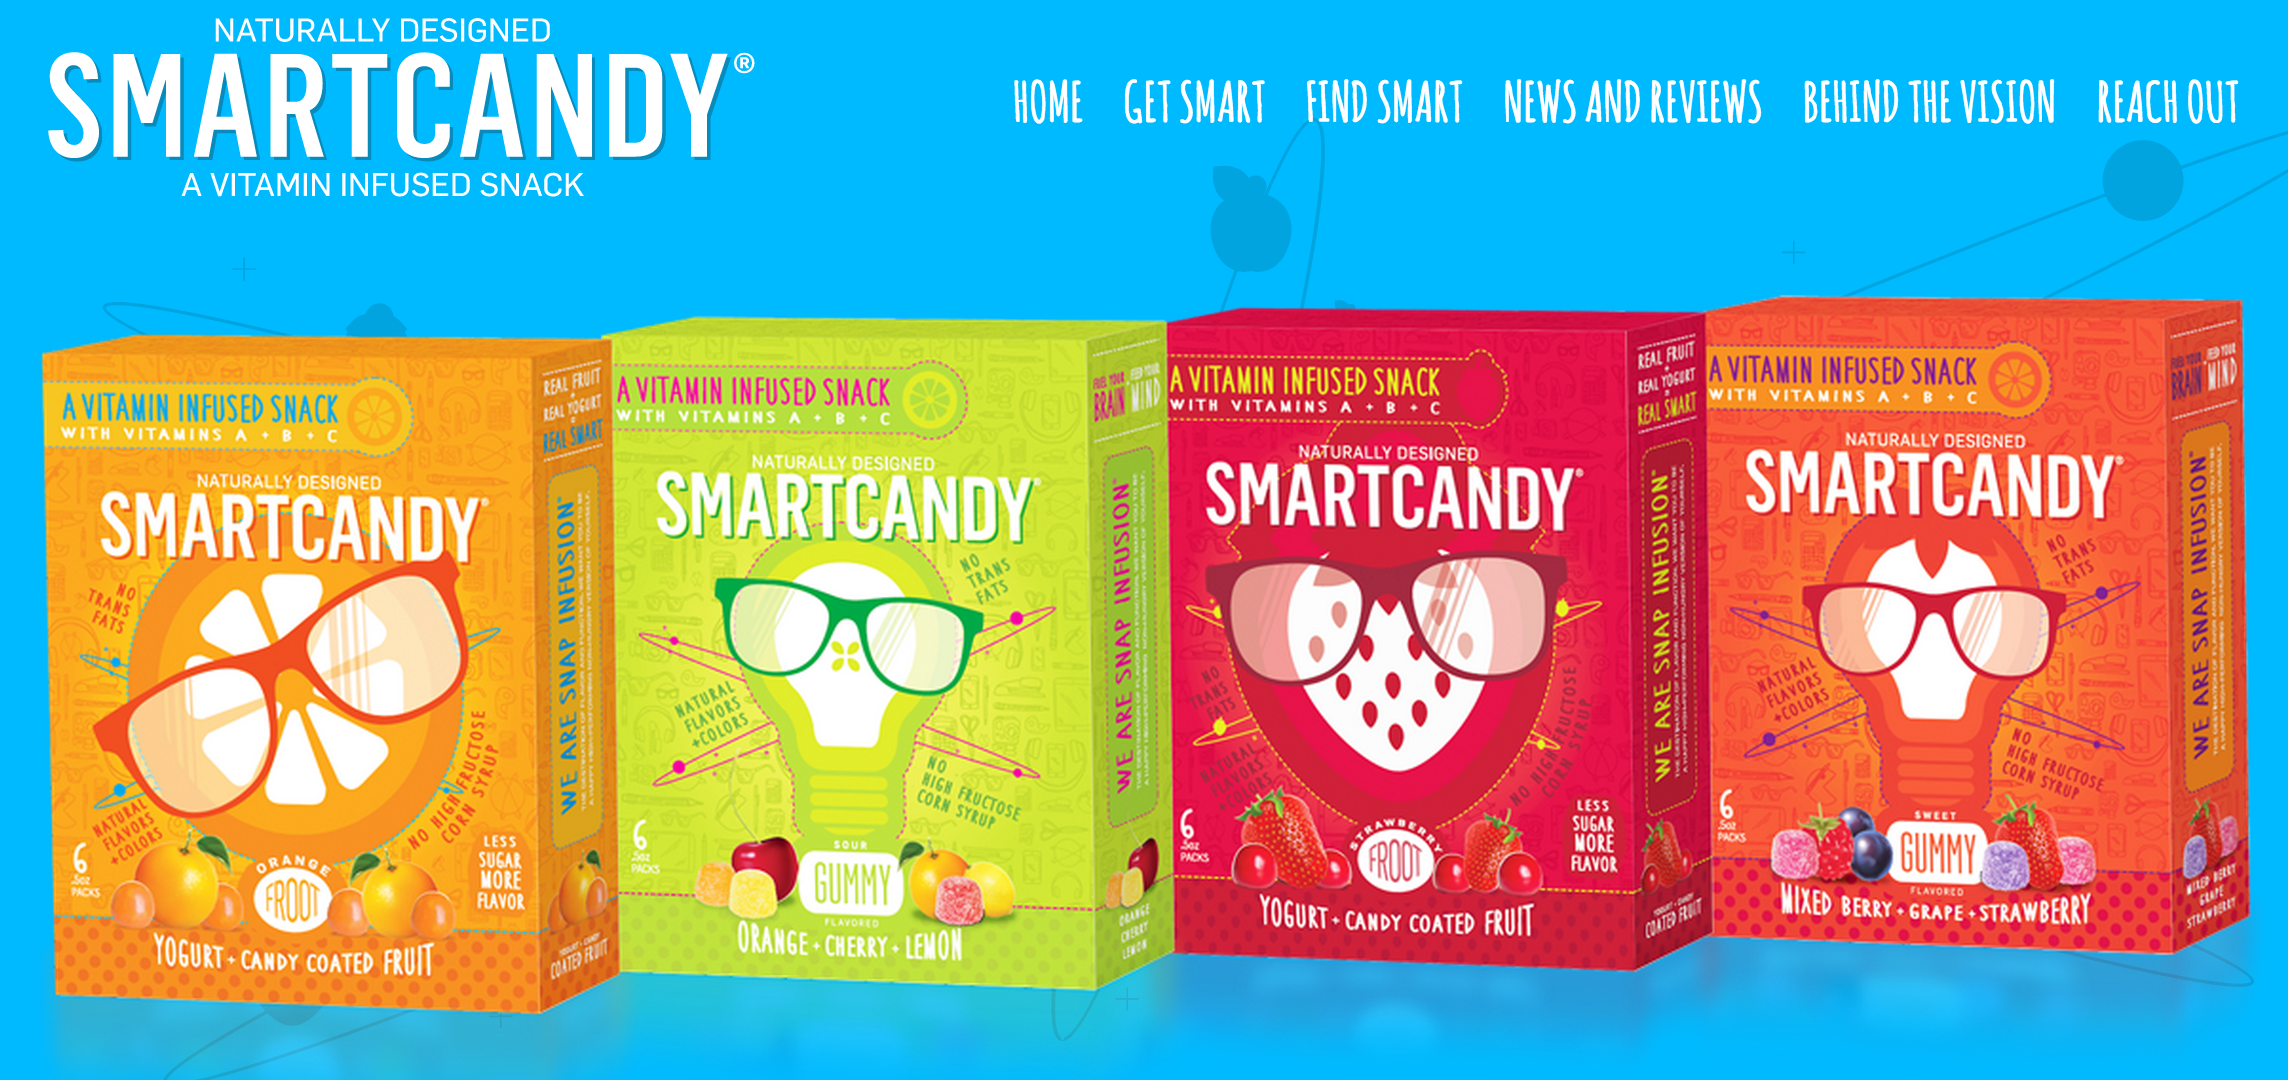 Makers Of SmartCandy Warned About Possibly Misleading Nutrition Claims